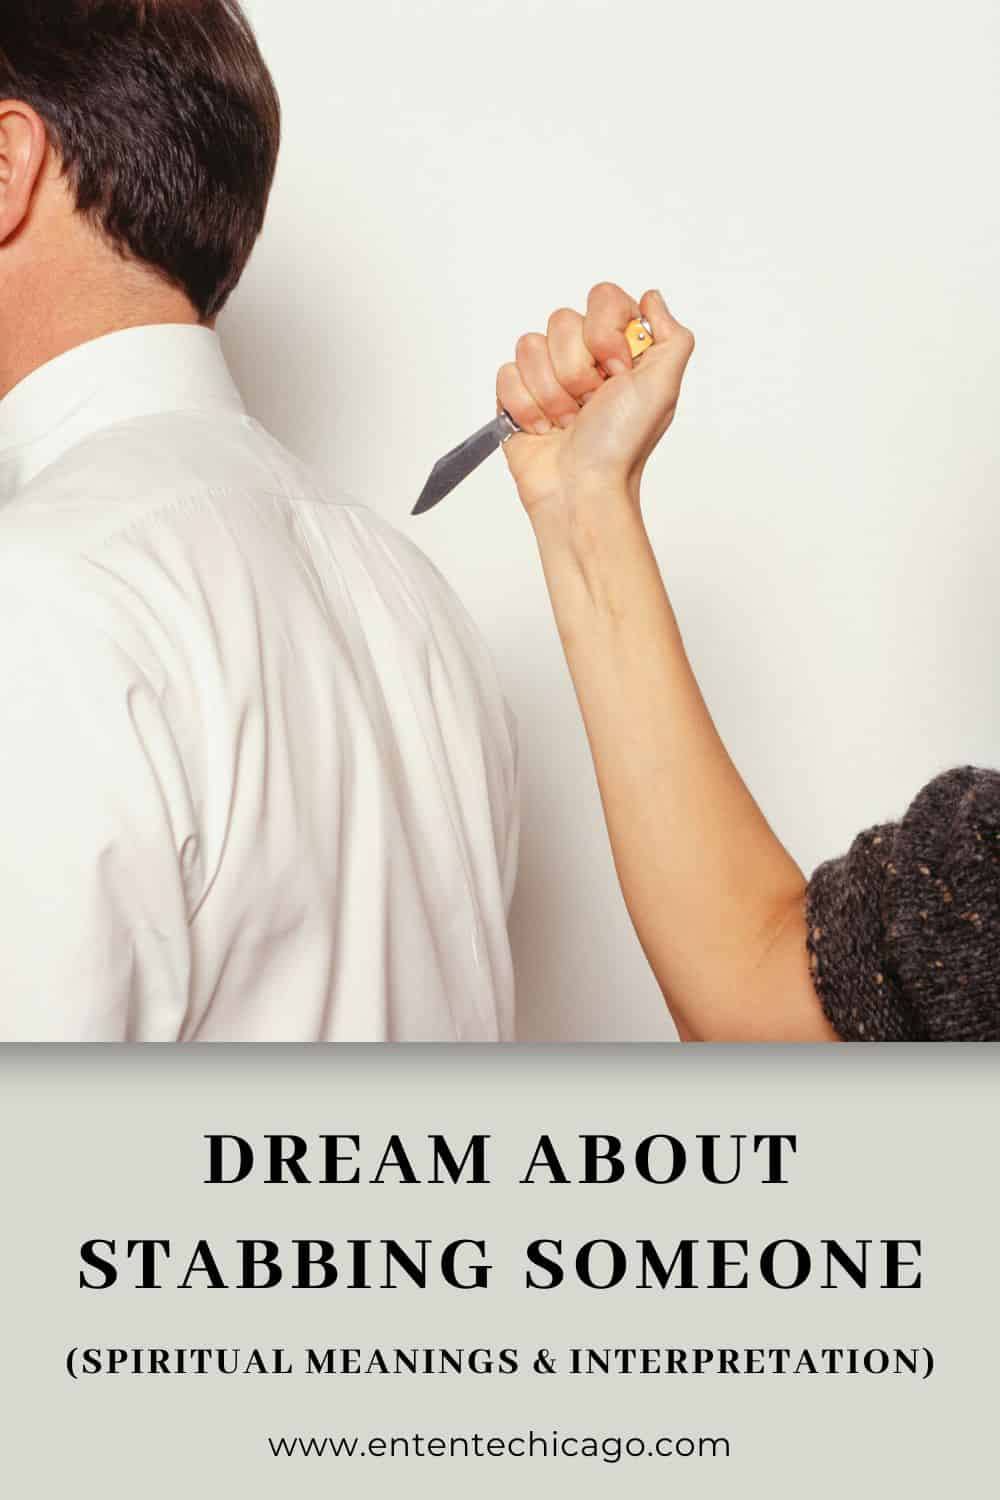 Ten meanings of stabbing someone in your dreams